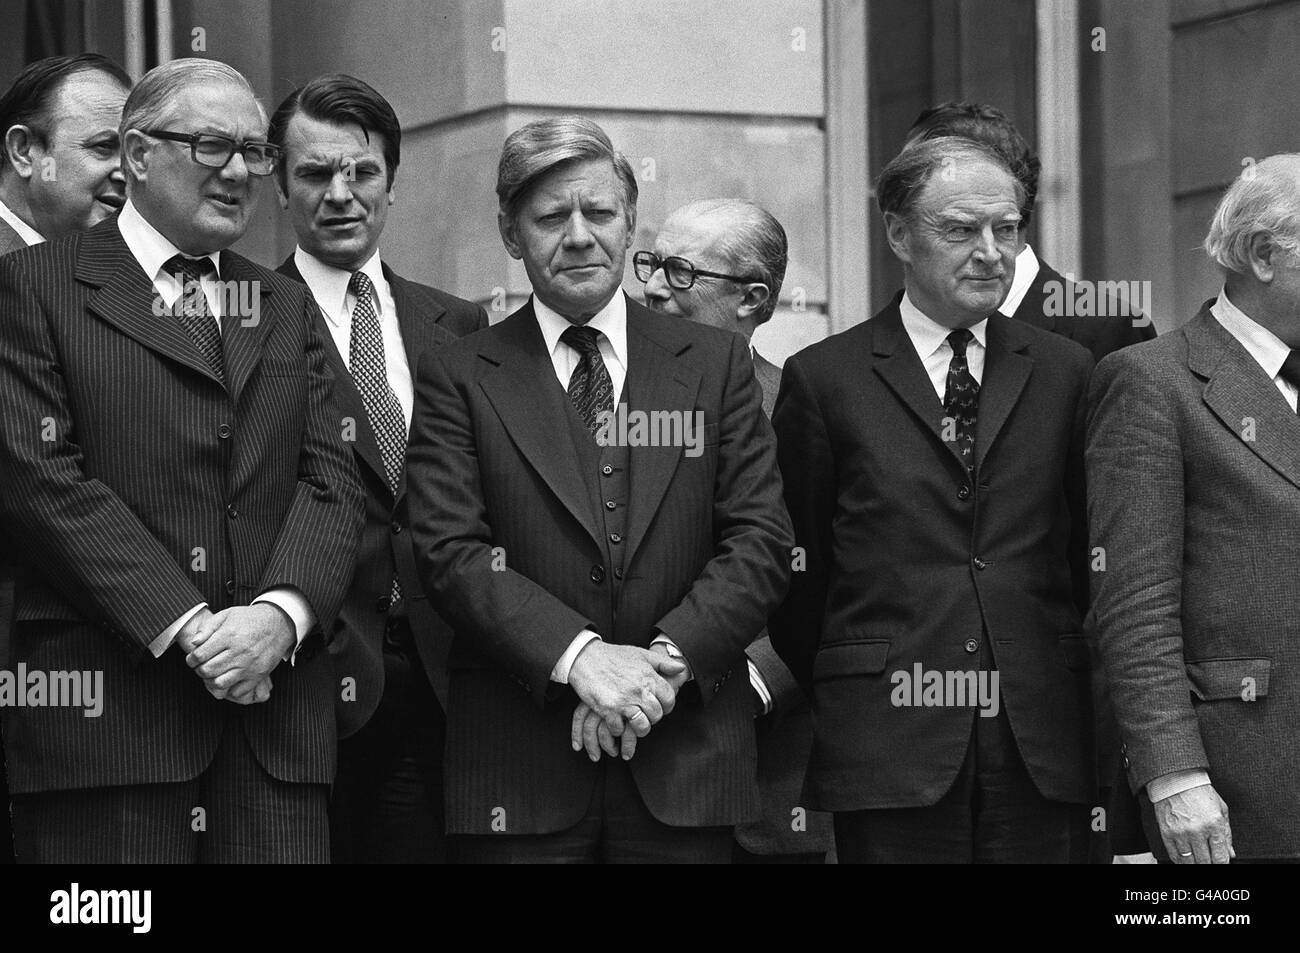 PA NEWS PHOTO 30/6/77 PRIME MINISTER JAMES CALLAGHAN IS JOINED BY EUROPEAN LEADERS OUTSIDE LANCASTER HOUSE IN LONDON AT THEIR END OF THEIR TWO DAY SUMMIT MEETING. FROM SECOND LEFT ARE: FOREIGN SECRETARY DR DAVID OWEN, HELMUT SCHMIDT (WEST GERMANY) AND LIAM COSGRAVE (IRELAND). Stock Photo